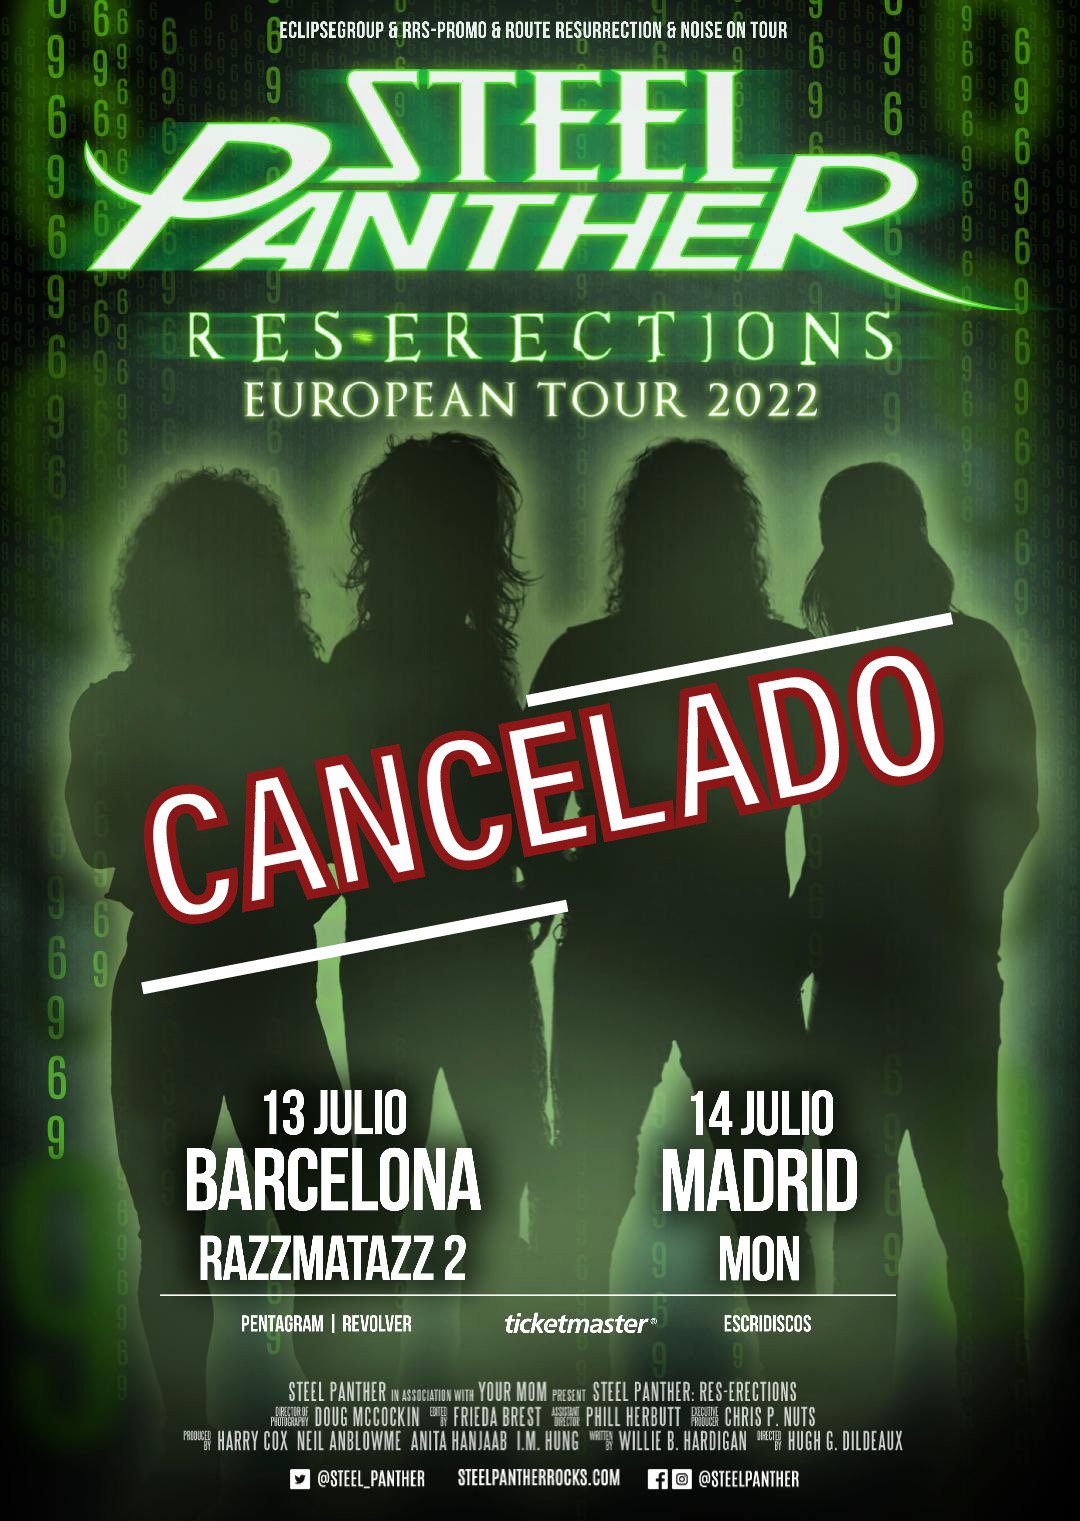 steel panther cancelado pic 1